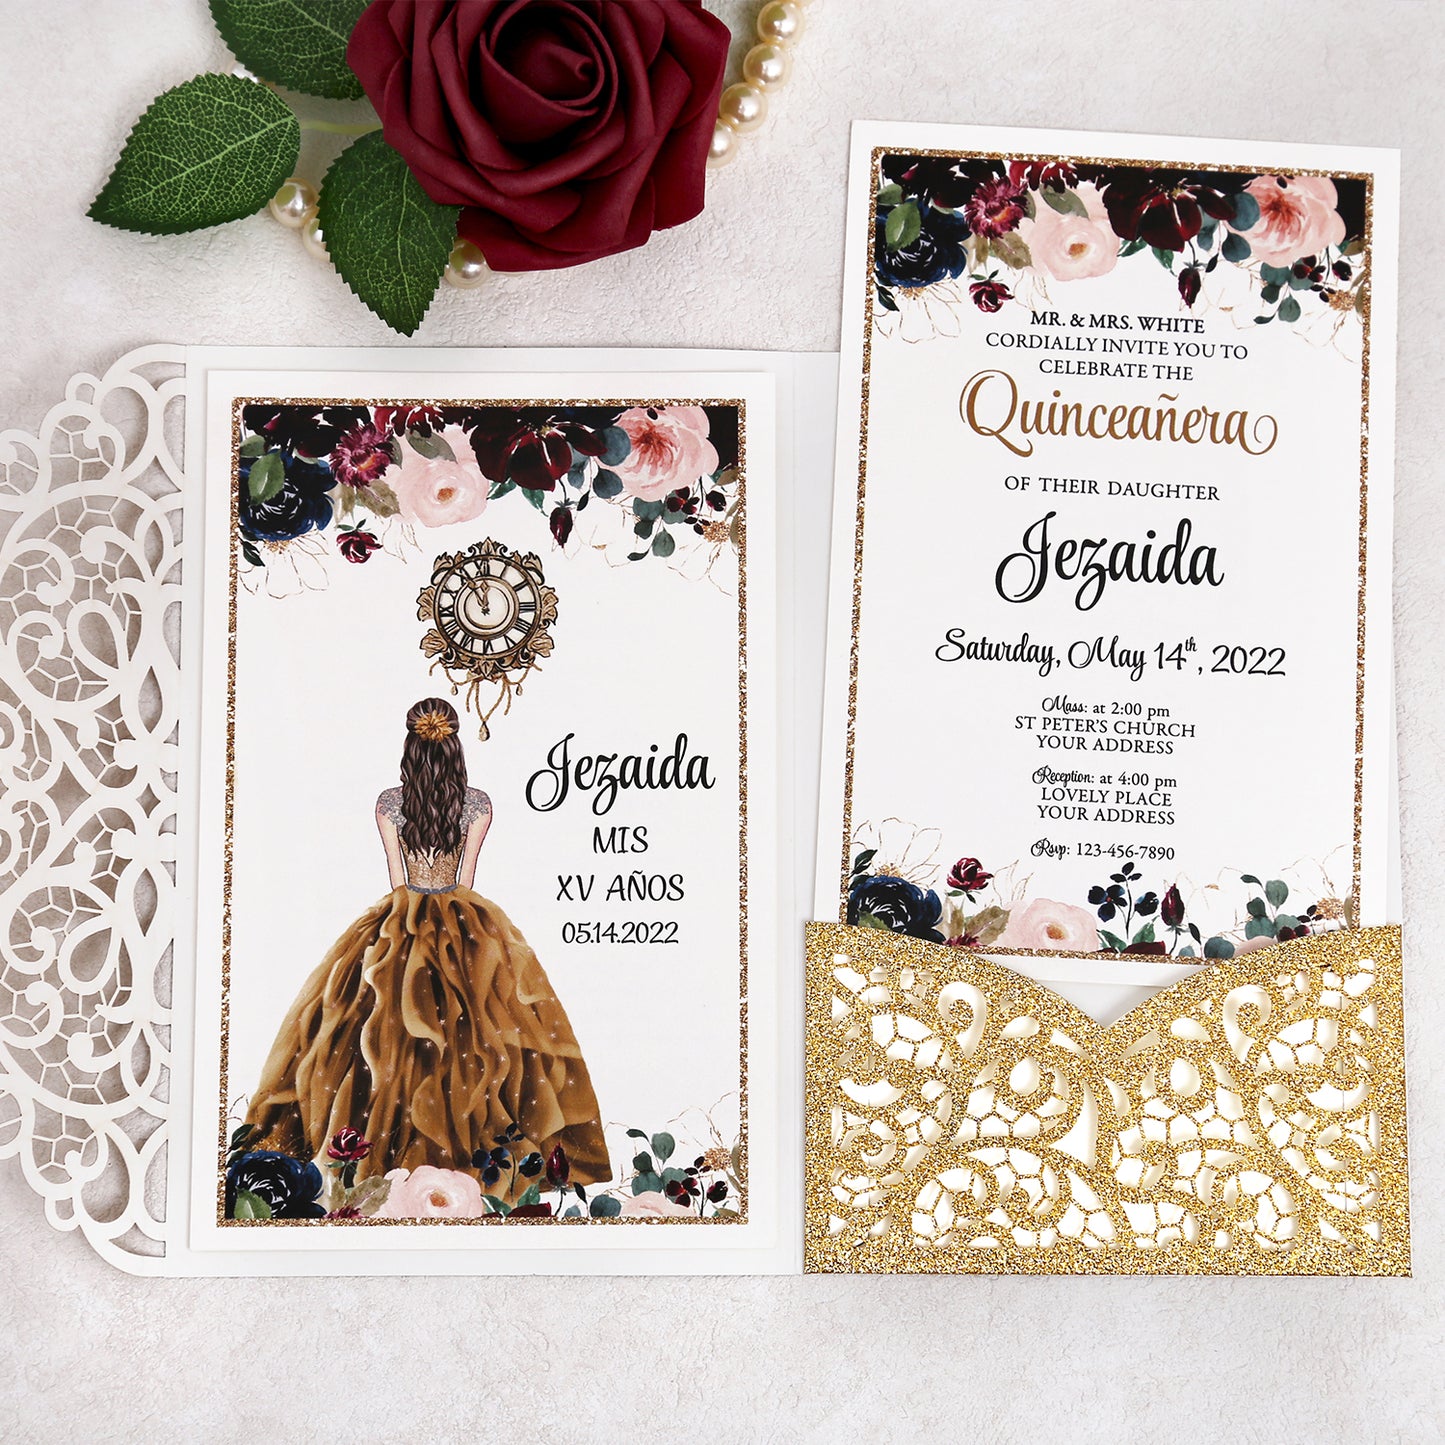 4.7 x7 inch Gold Glitter Laser Cut Hollow Rose Quinceanera Invitations Cards with Envelopes for Quinceanera Party